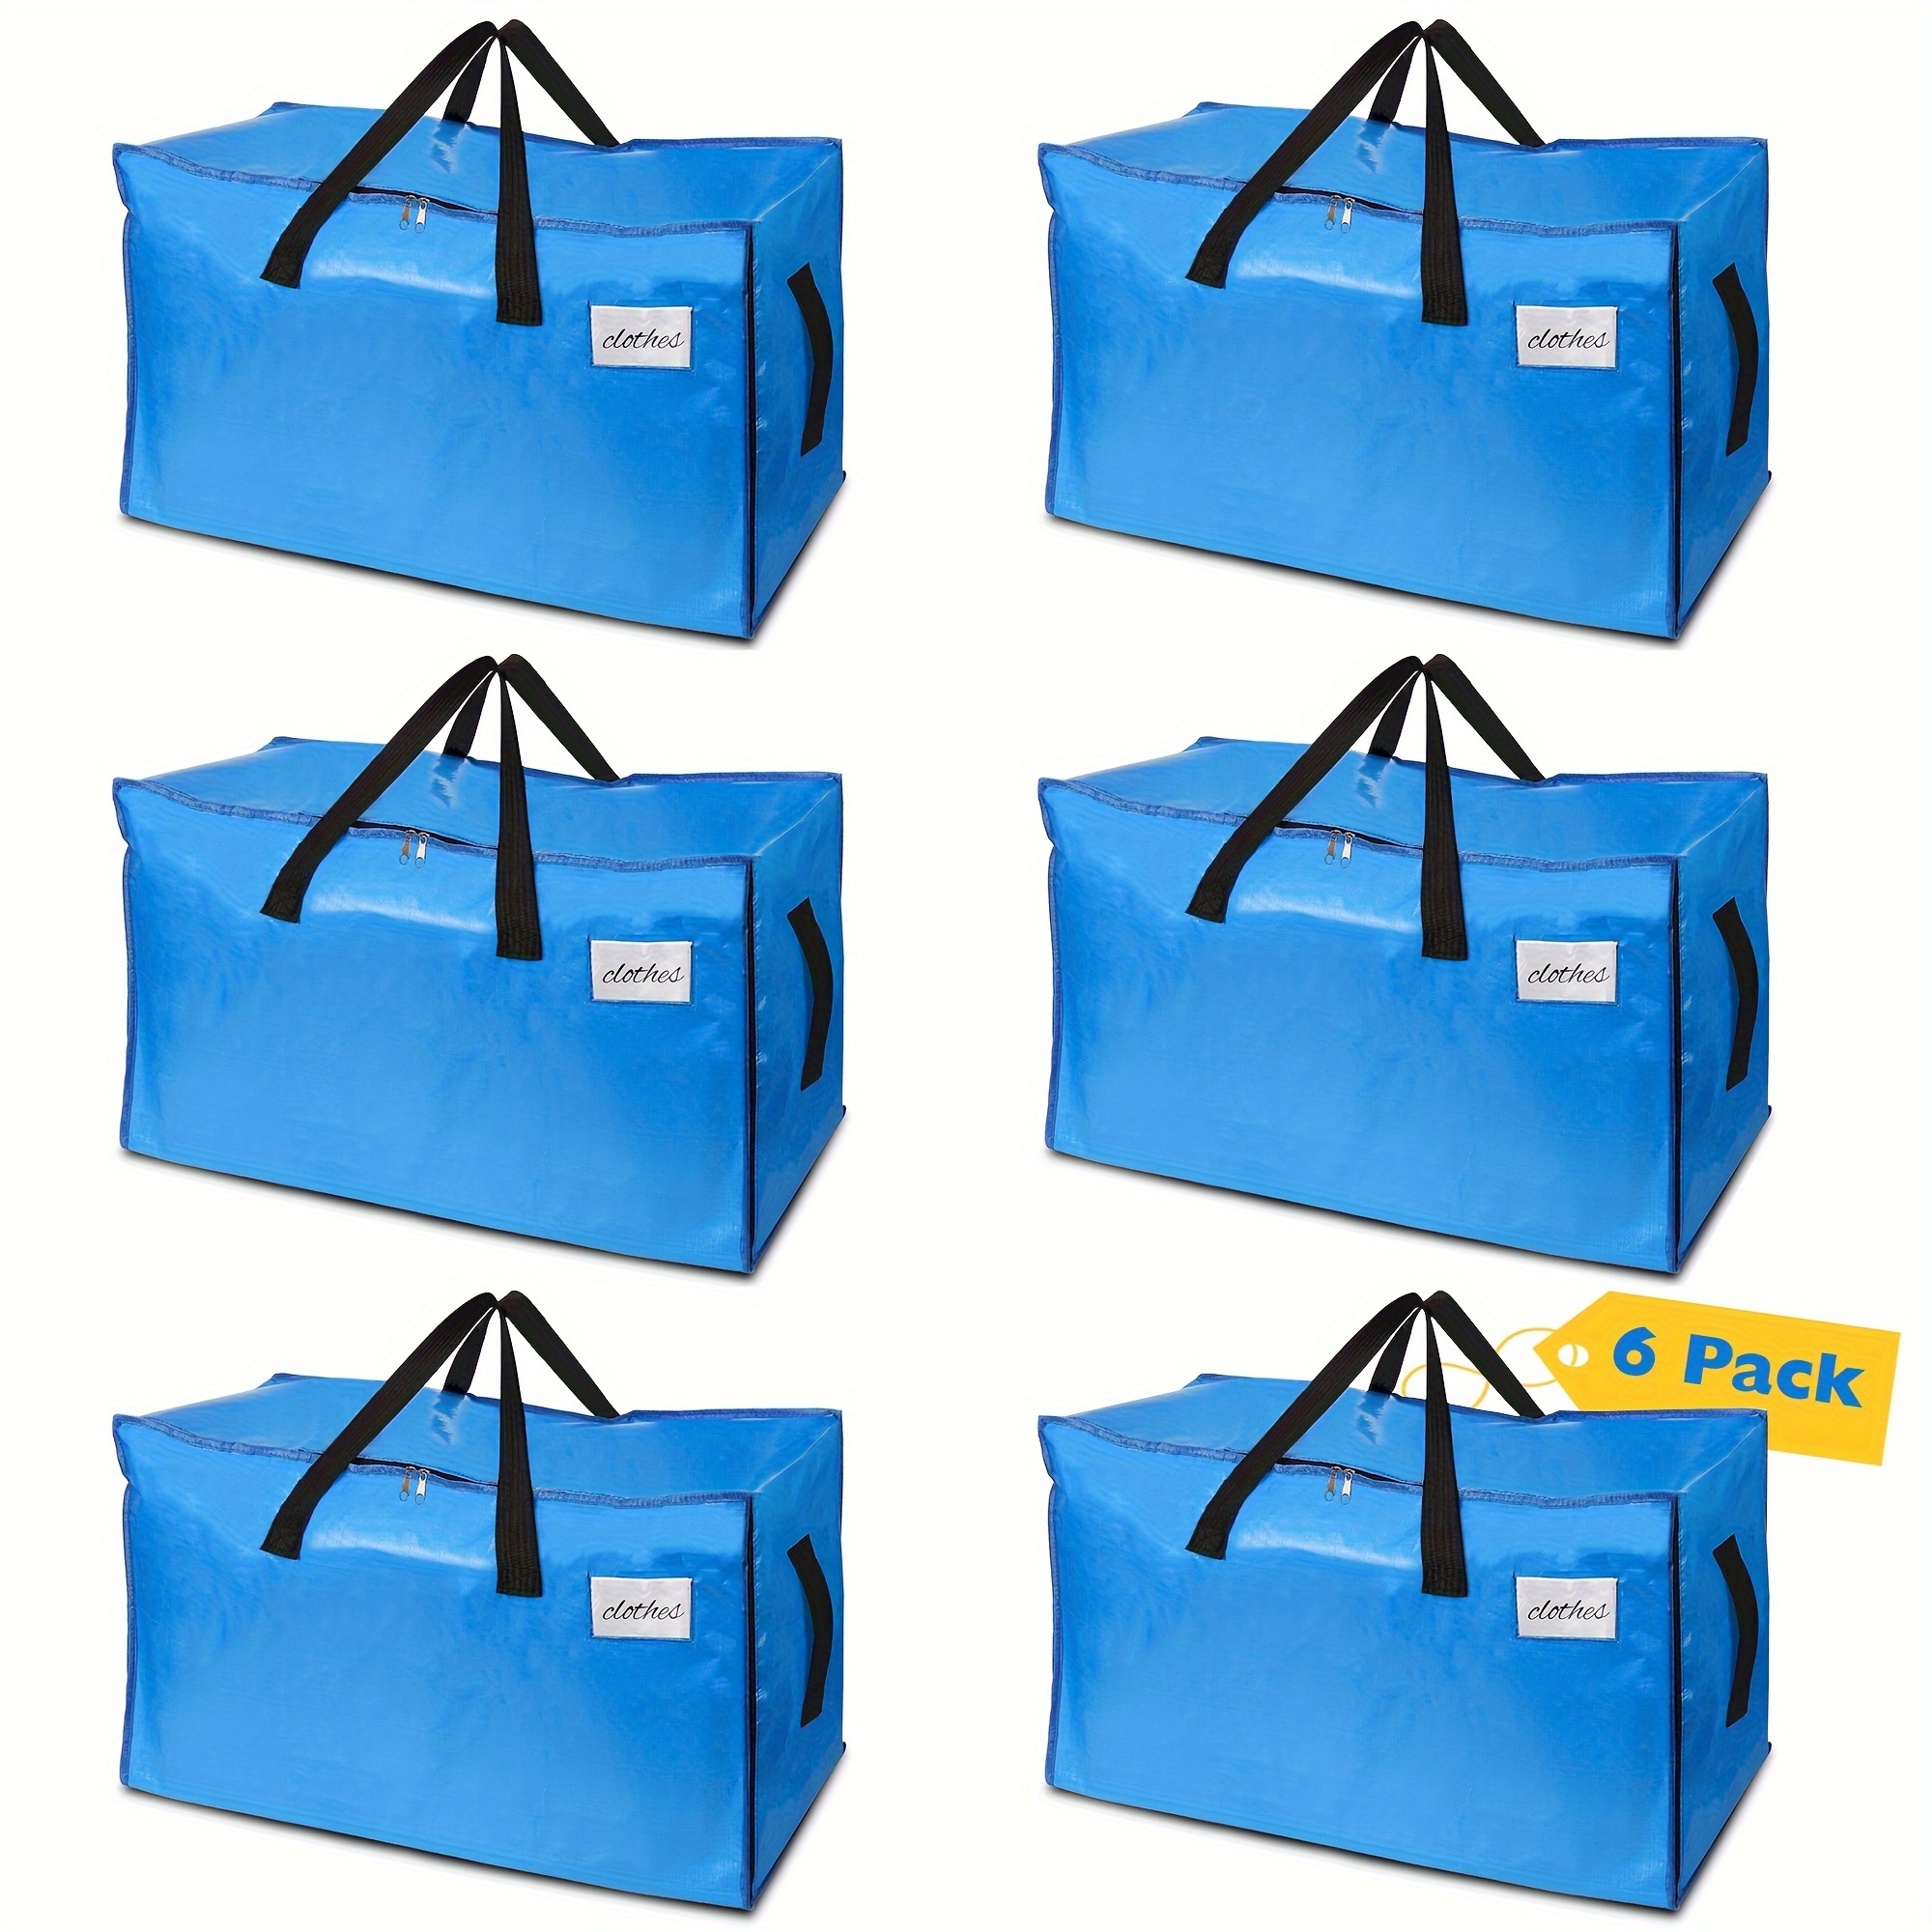 

6pcs Storage Moving Bags, Large Storage Bags For Clothes, Heavy Duty Moving With Double Handles And Zippers For Moving Travelling, Clothes Organizer, Blue